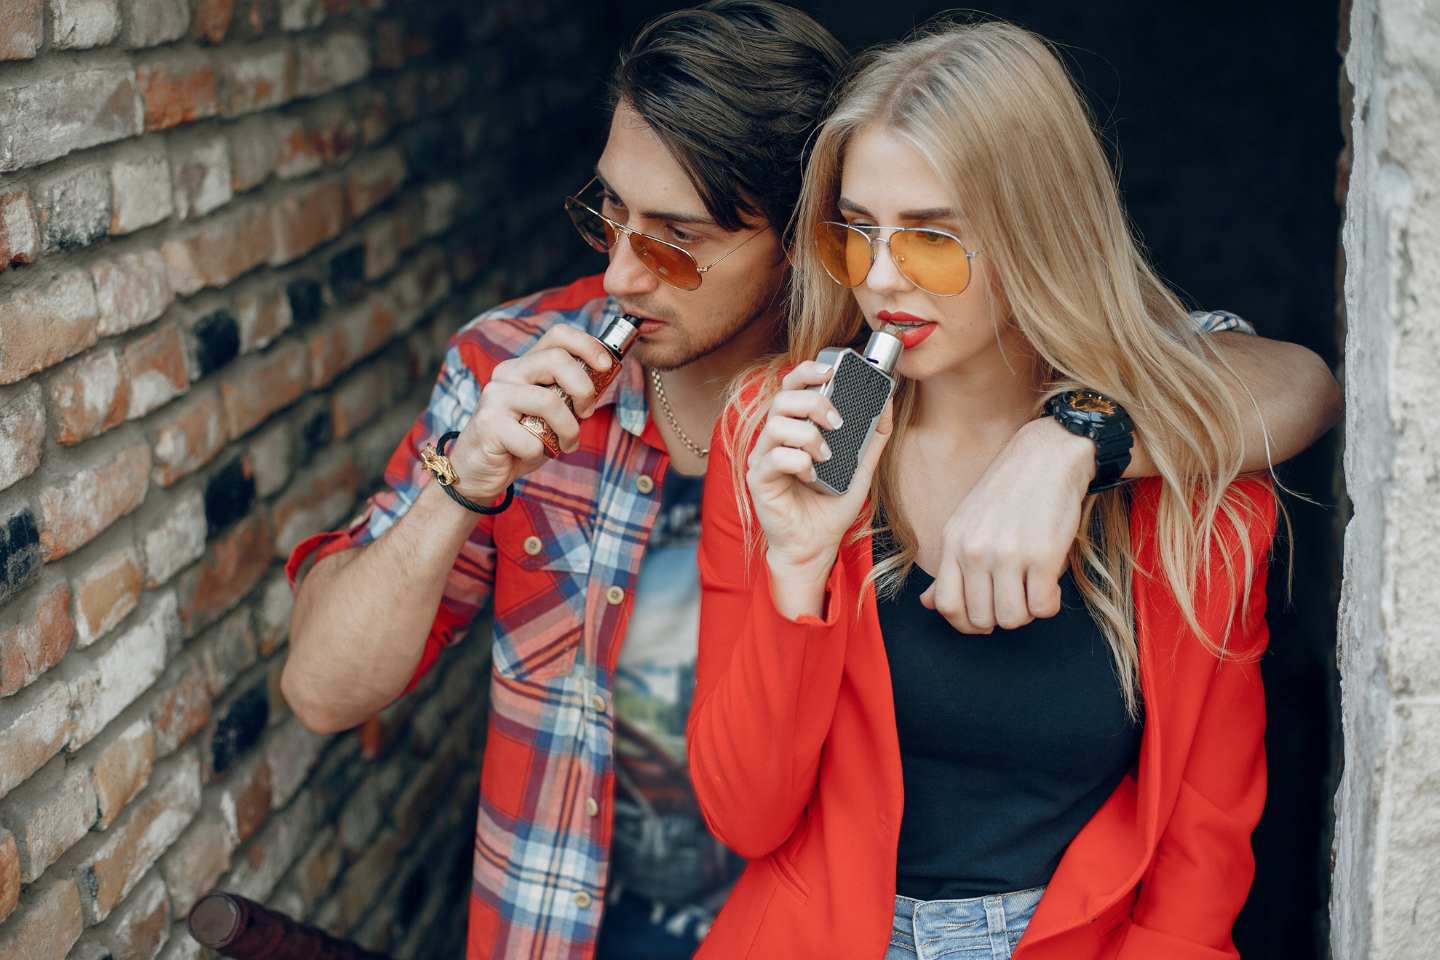 A couple vaping together